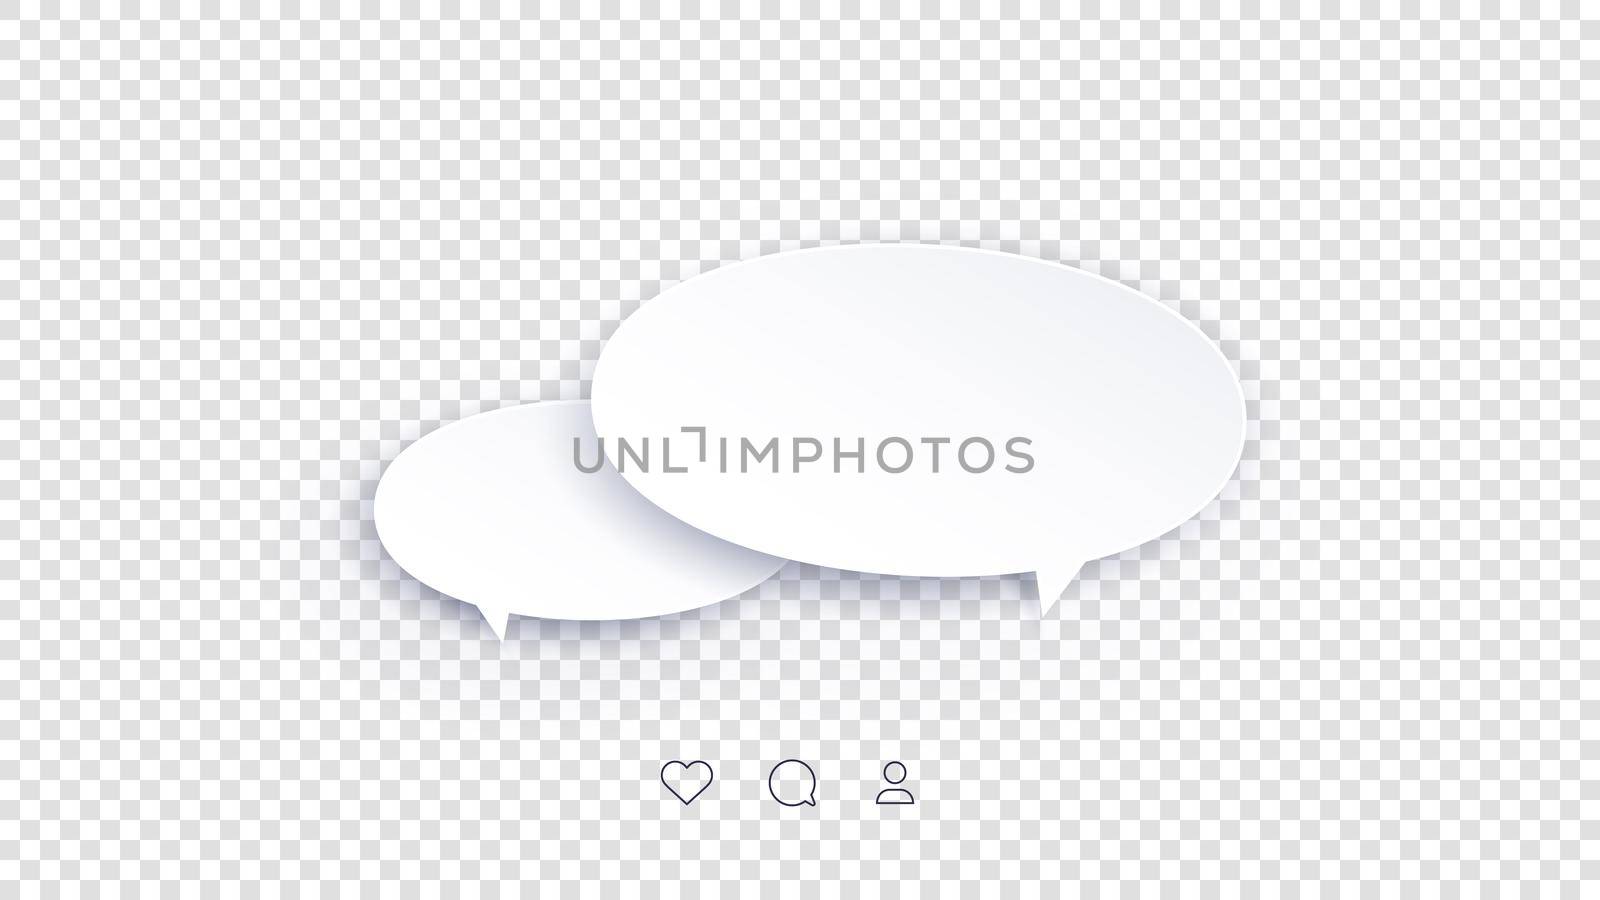 Vector Perfect Paper Style Speech Bubbles. Blank Isolated 3D Paper Stickers On Transparent Background.